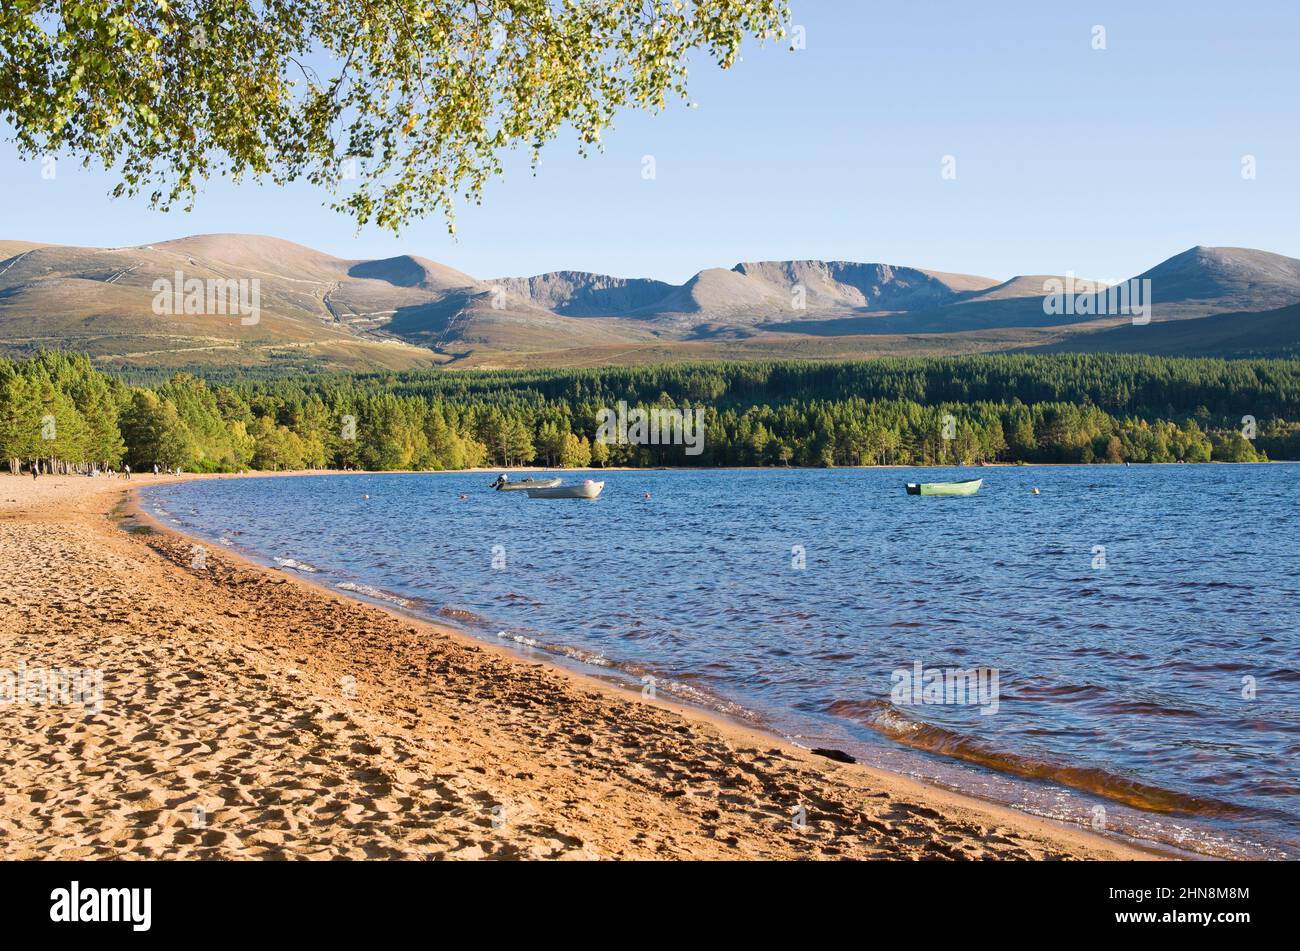 Sandy beach, Loch Morlich, Cairngorms, Scottish Highlands, sunny September afternoon, Glenmore Forest and the Northern Corries a scenic backdrop. Stock Photo